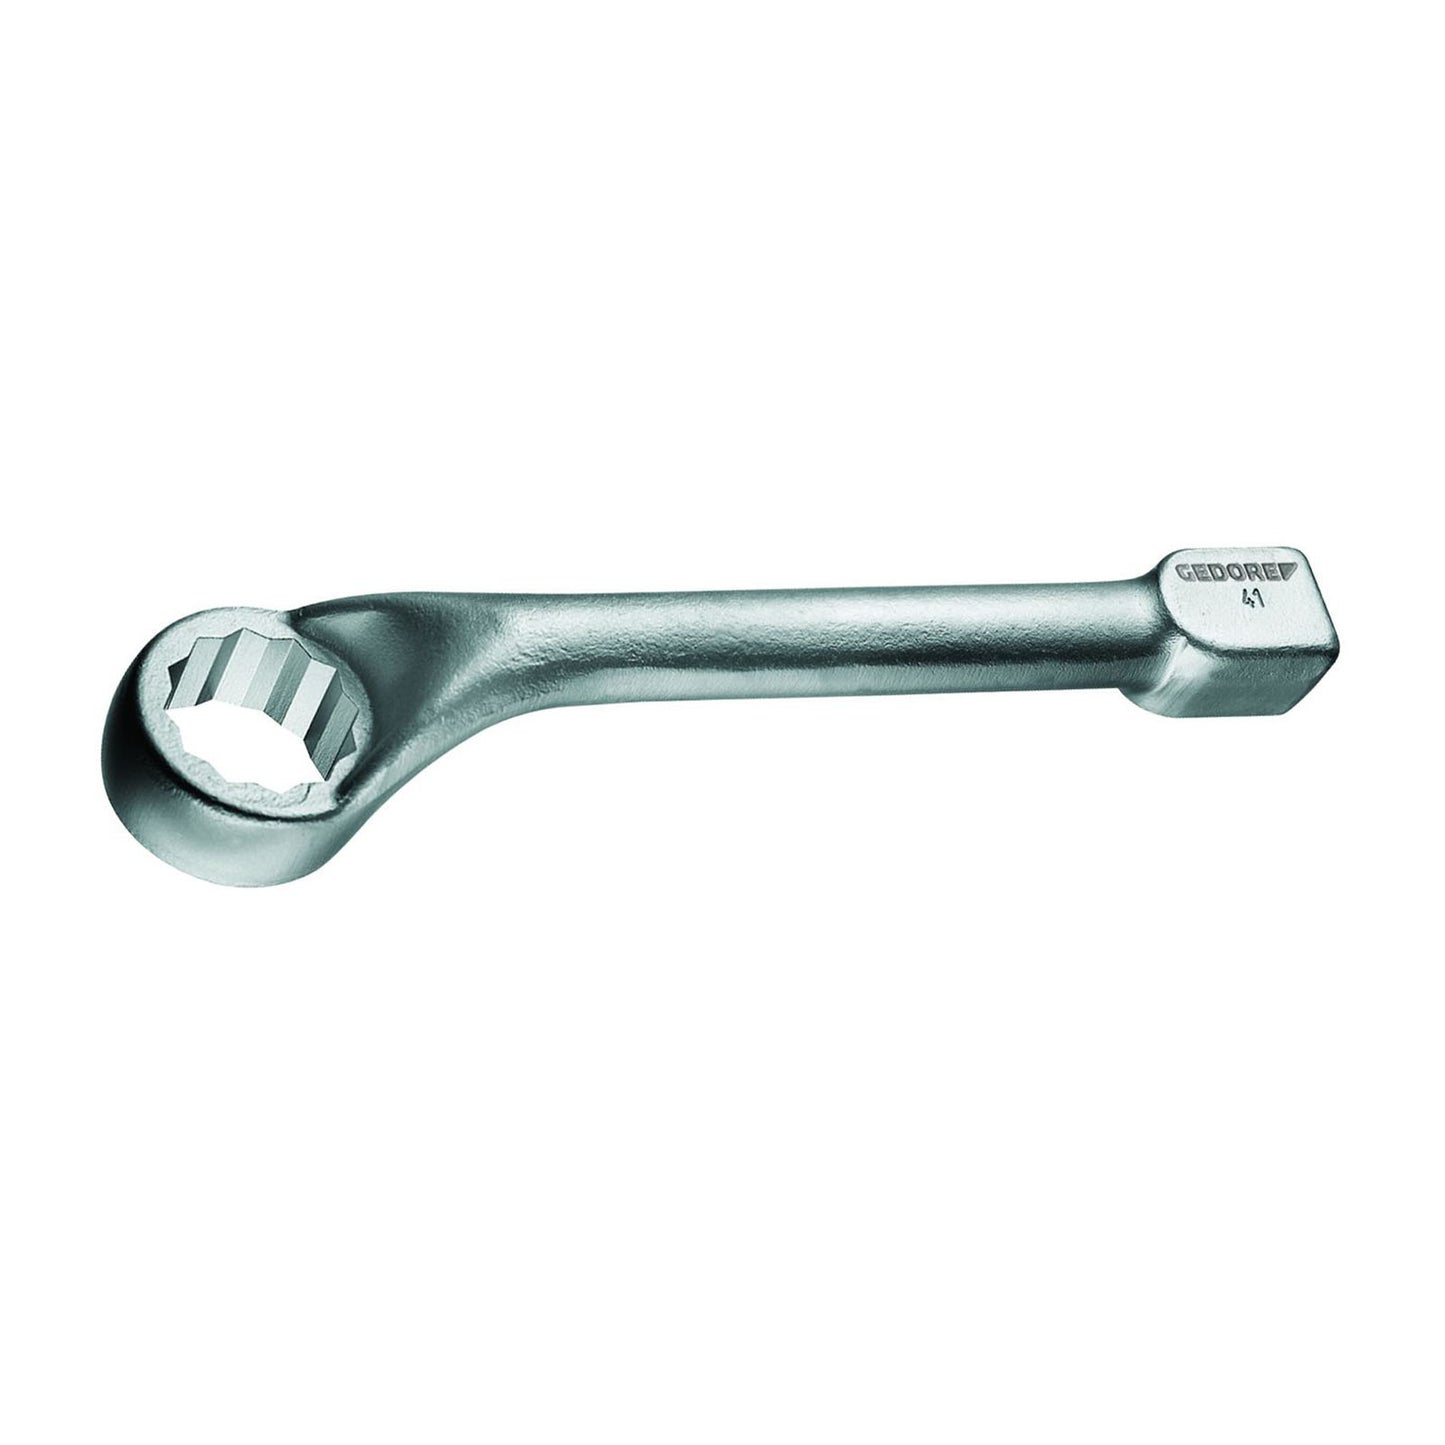 GEDORE 306 G 46 - Offset Wrench, 46mm (1416111)